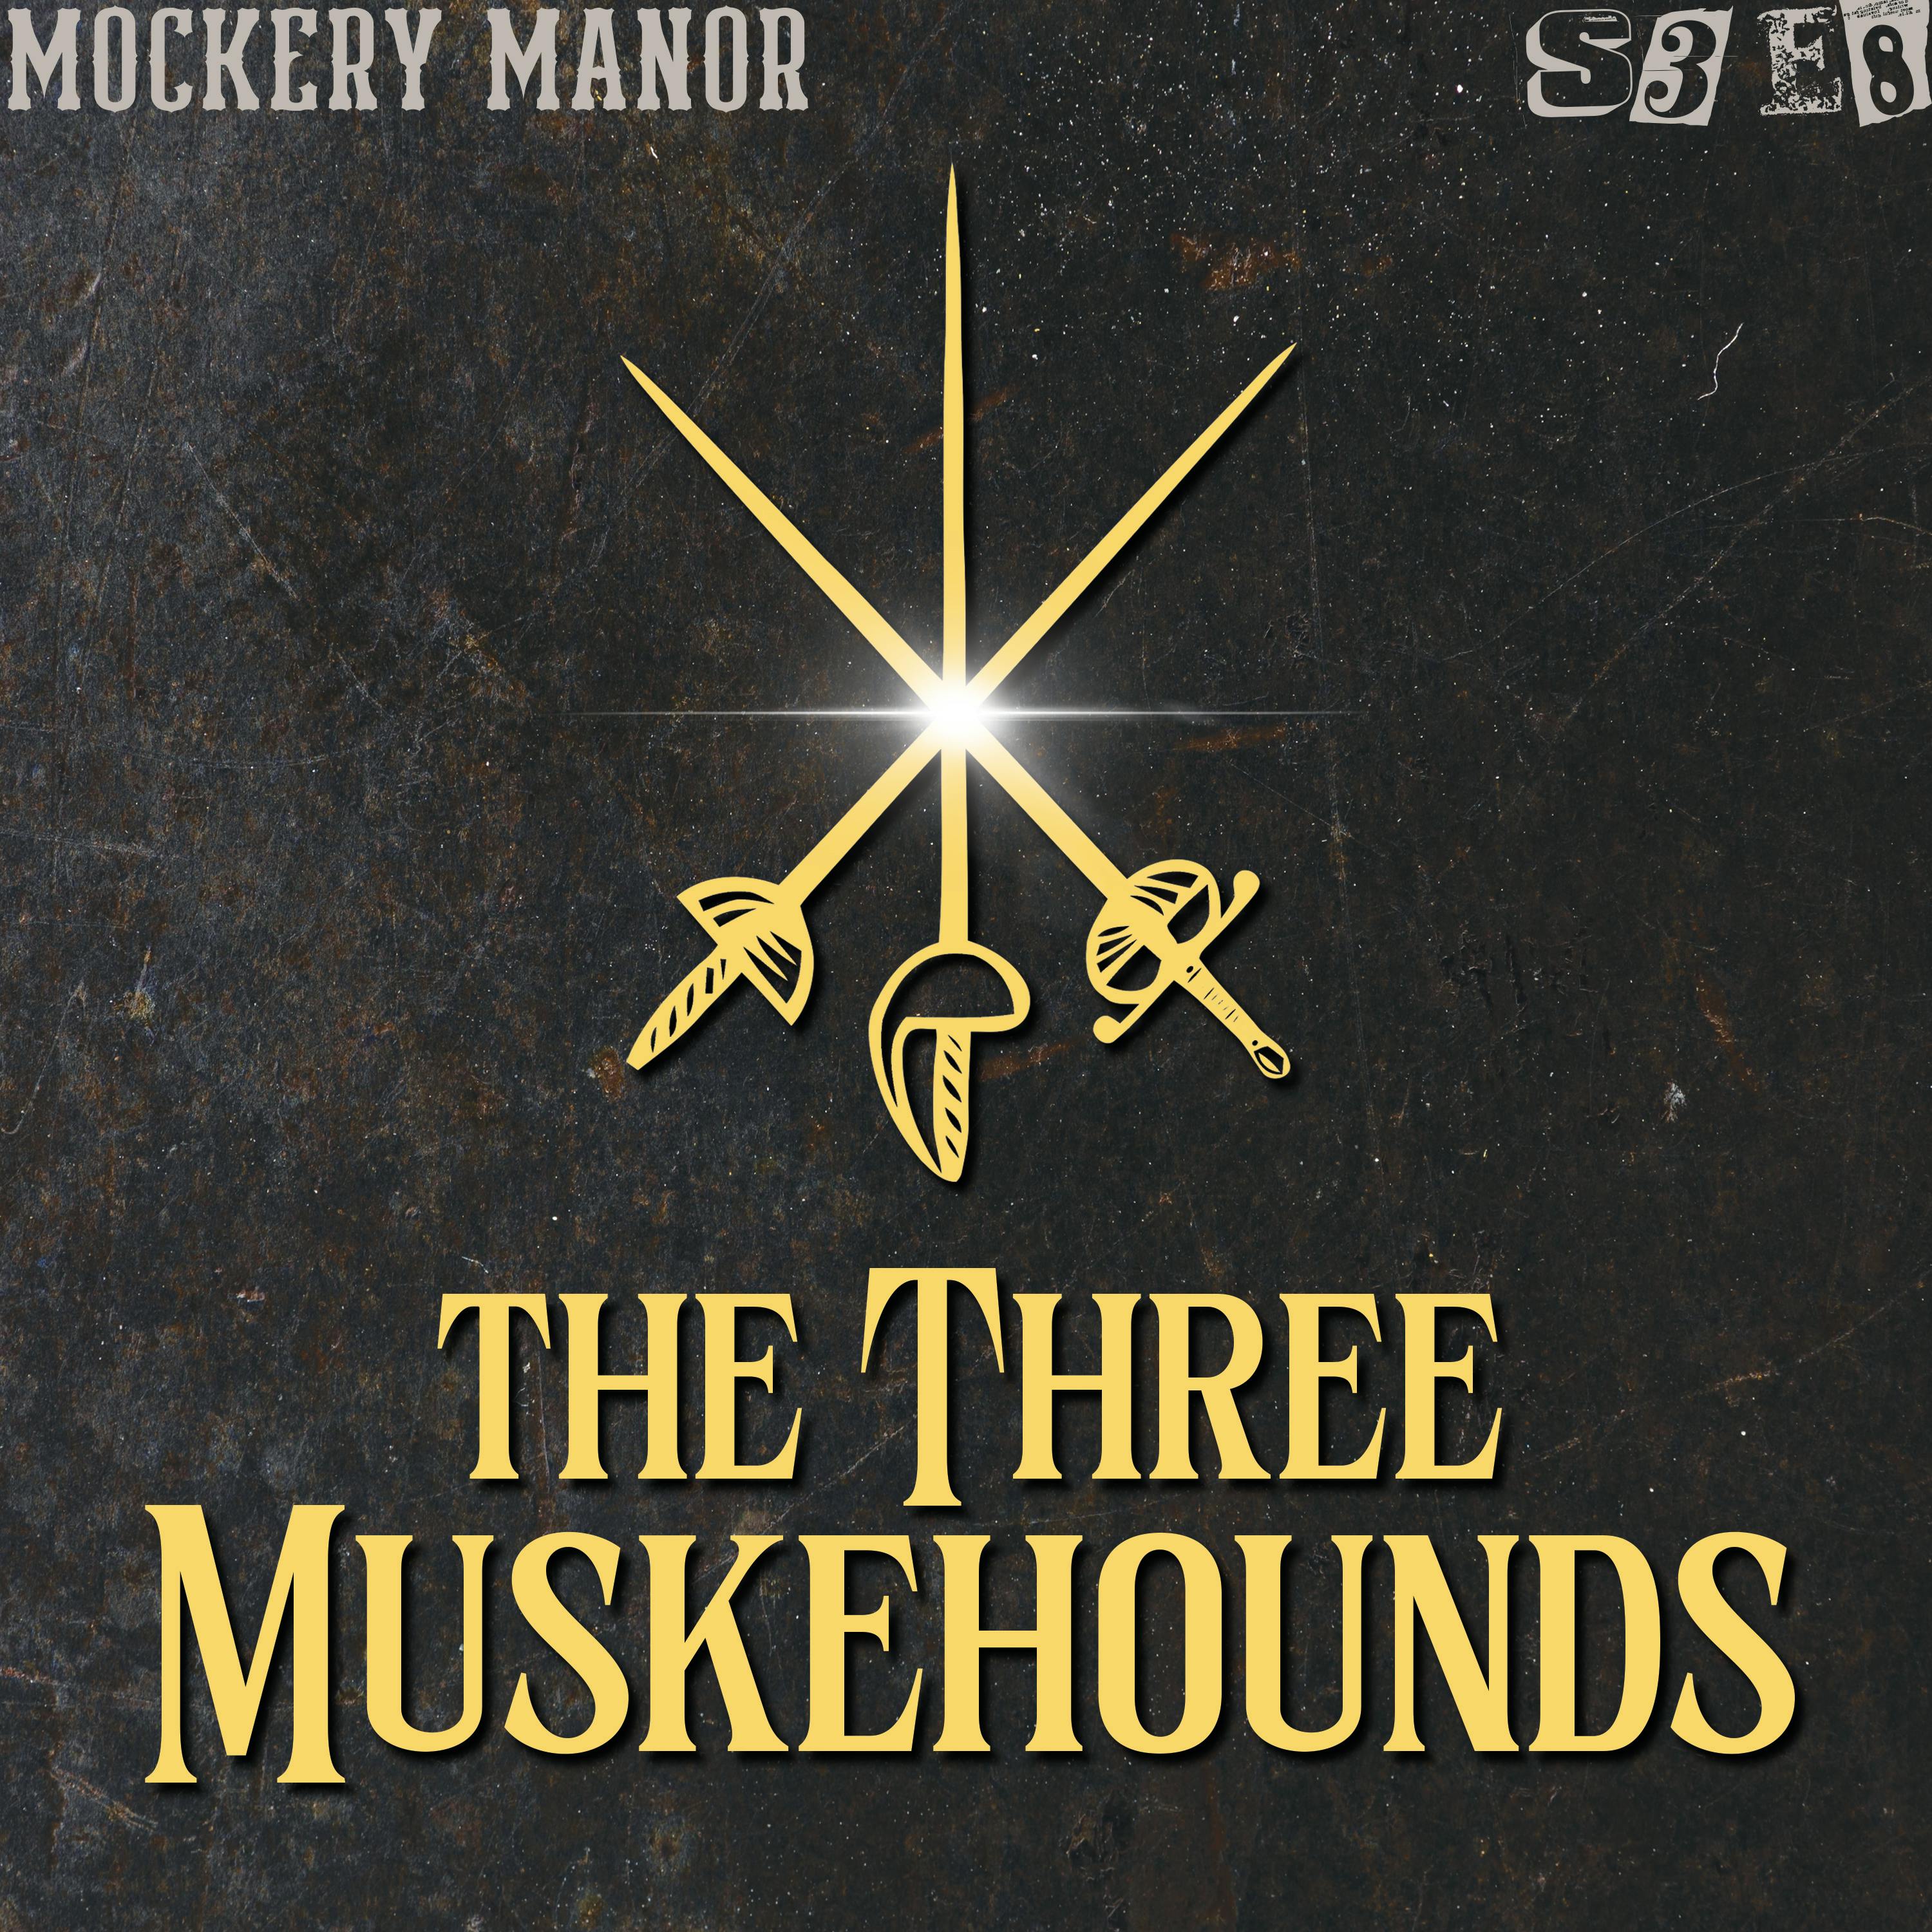 S3 E8 - The Three Muskehounds